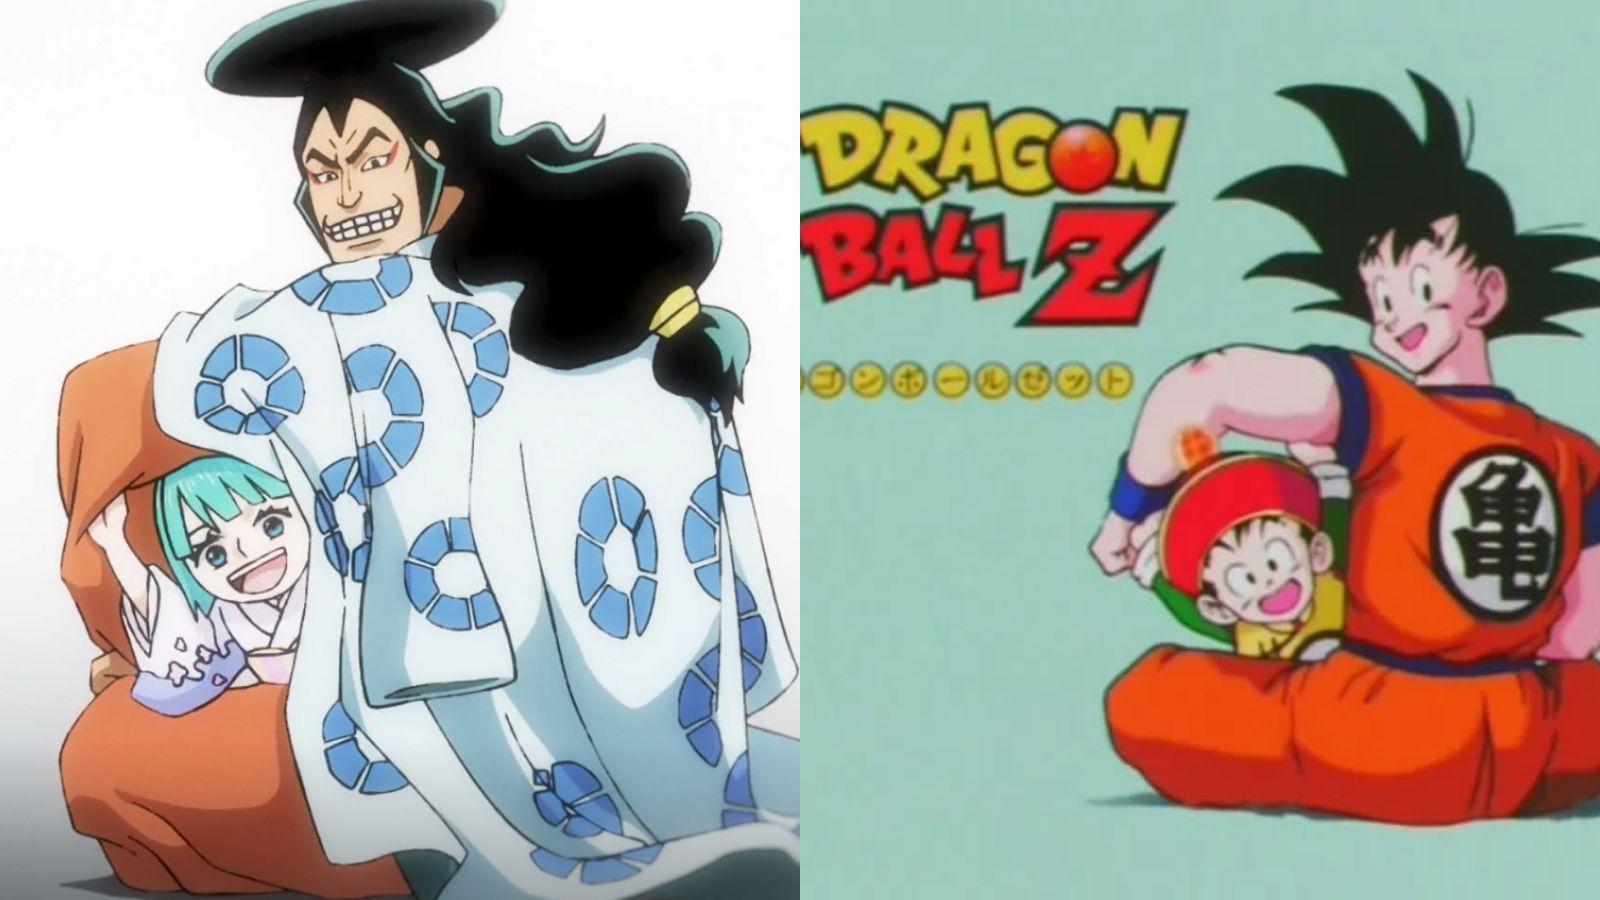 One Piece & Dragon Ball Super Anime Specials on the Way